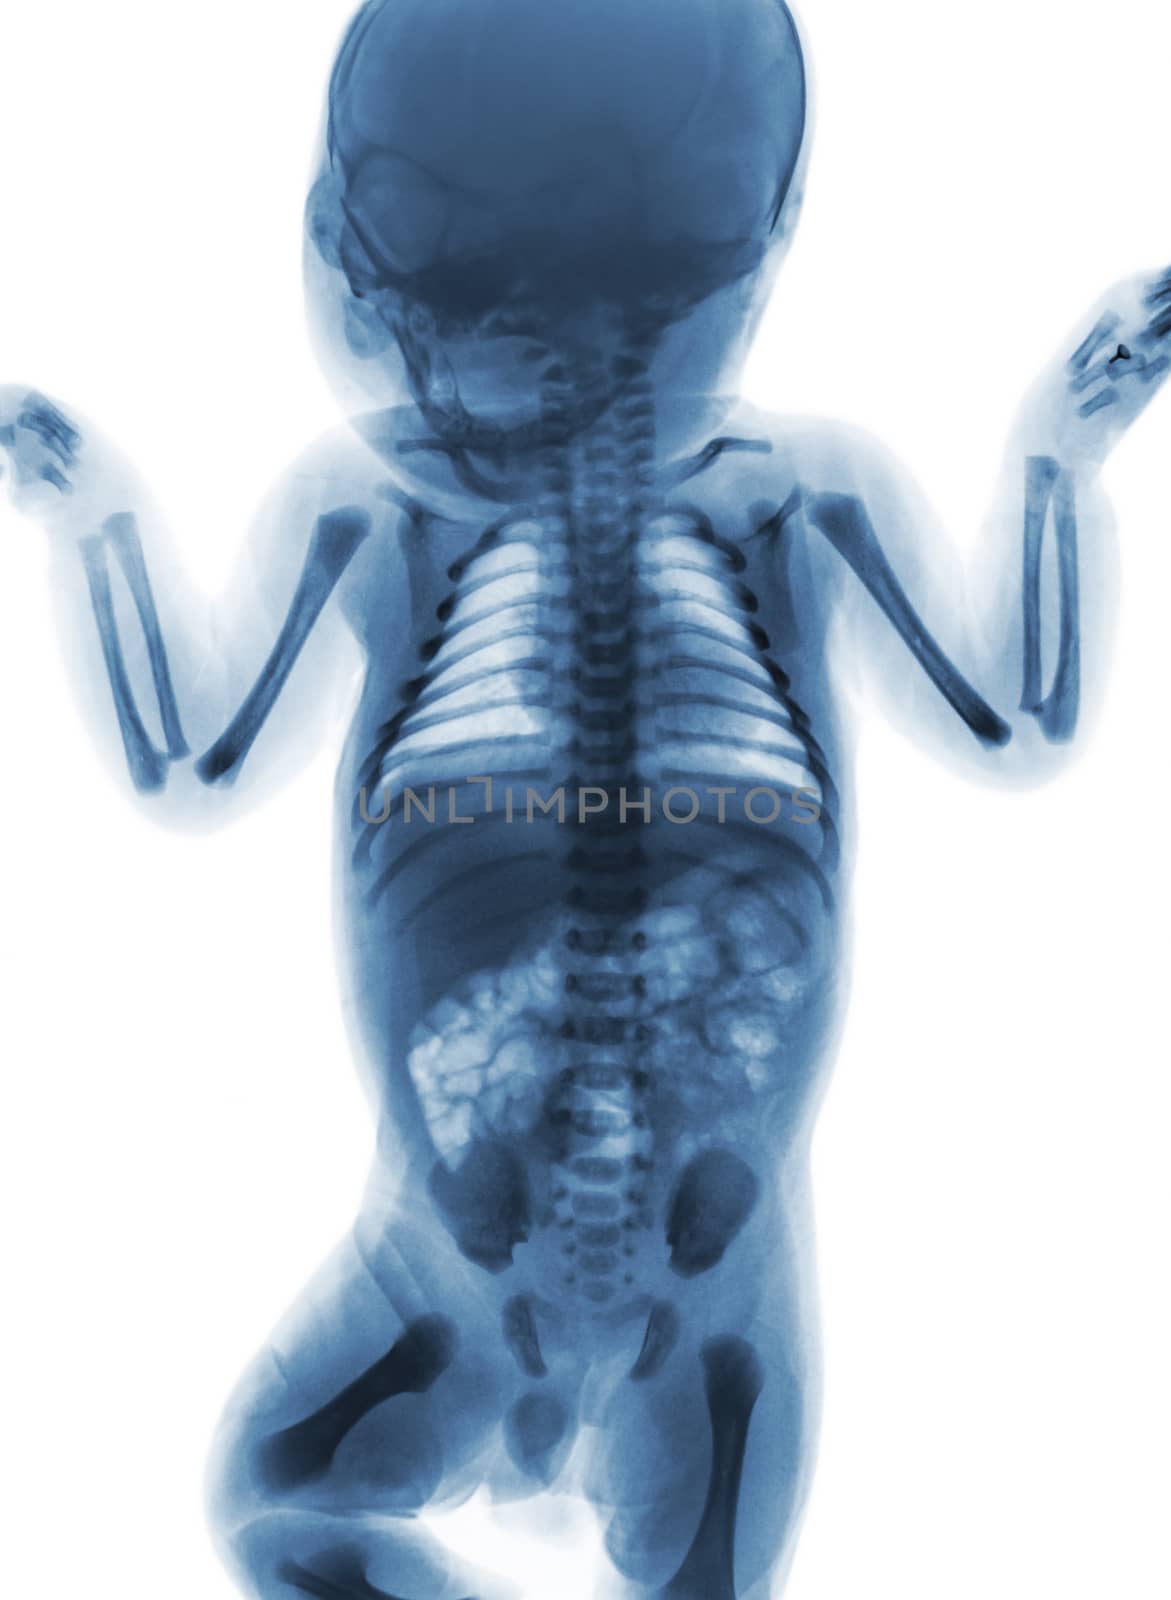 Film x-ray whole body of normal infant . front view .